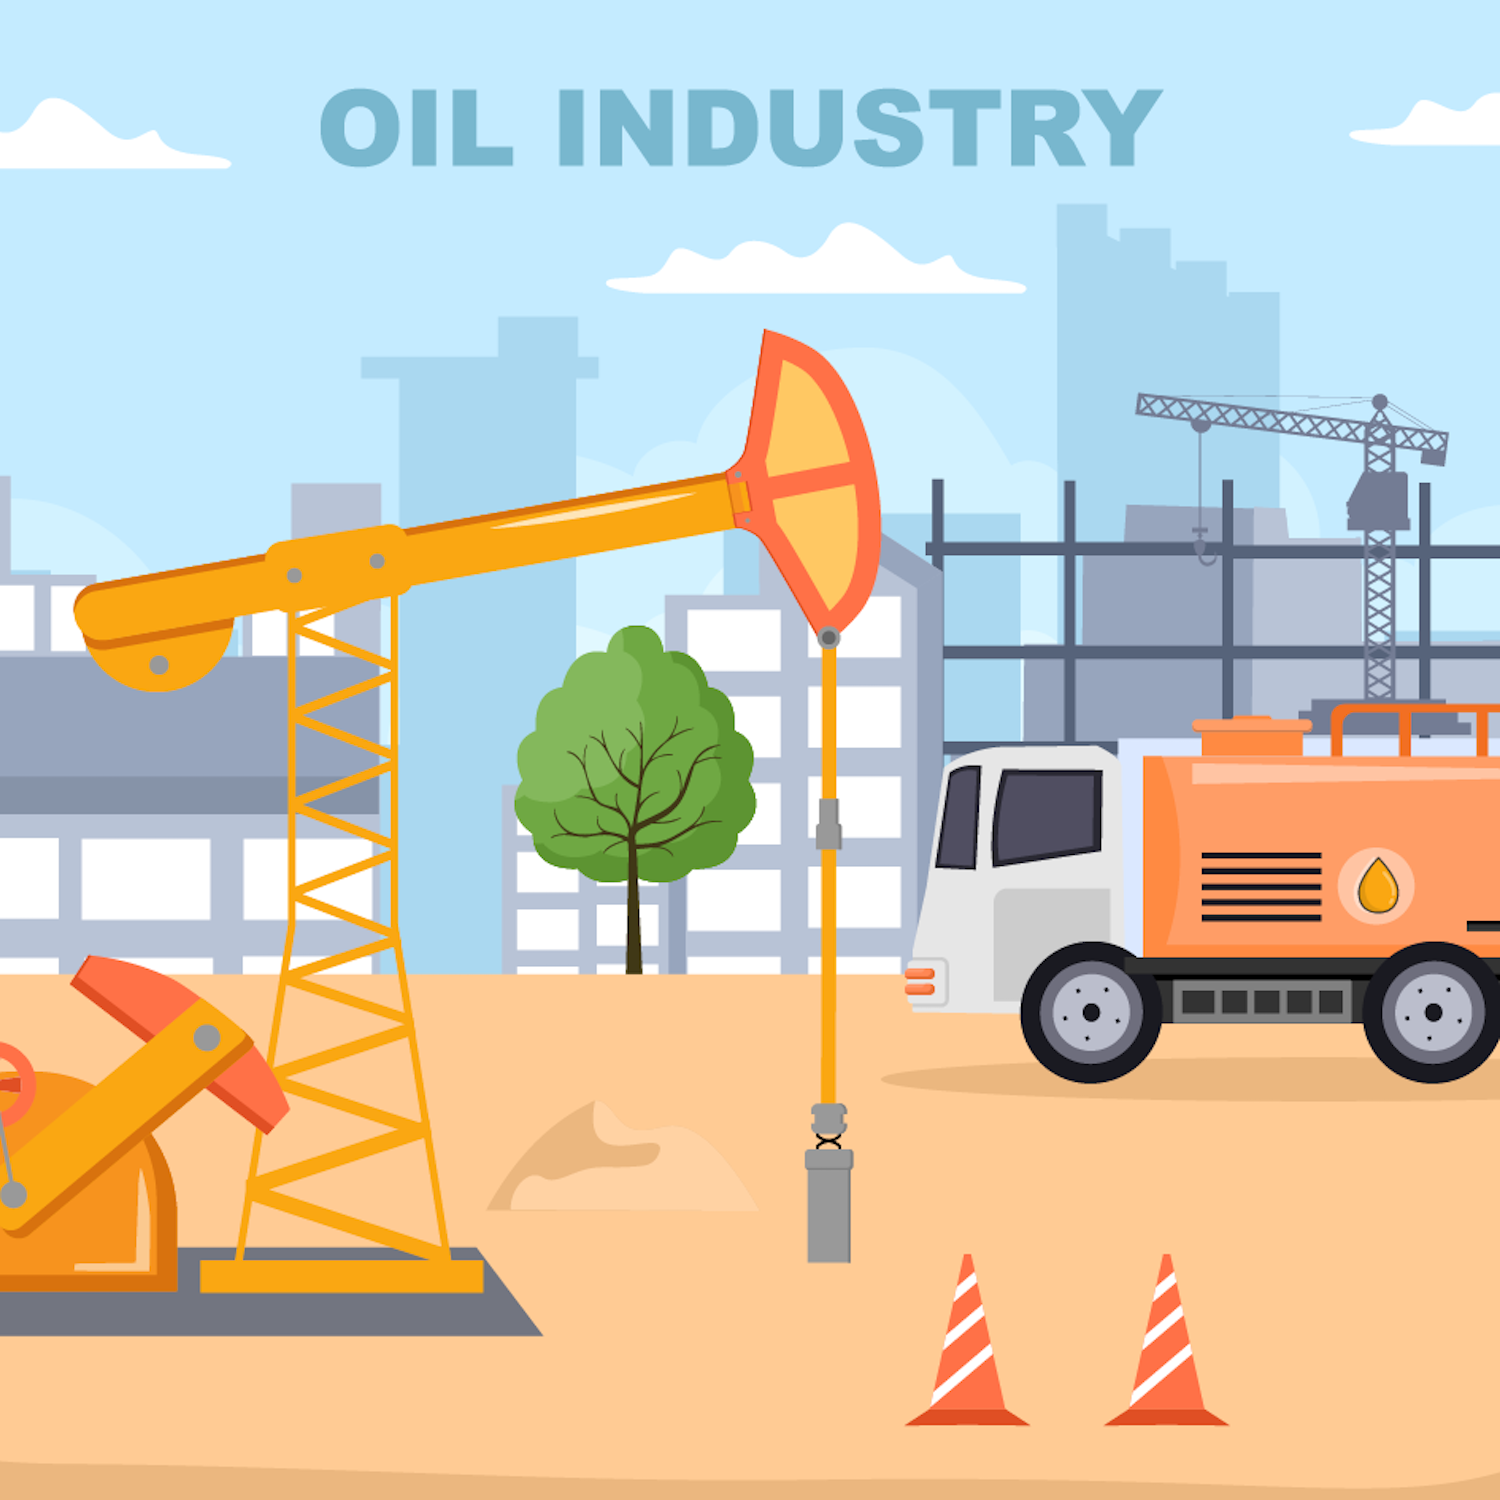 15 Oil Gas Fuel Industry Vector Illustration cover image.